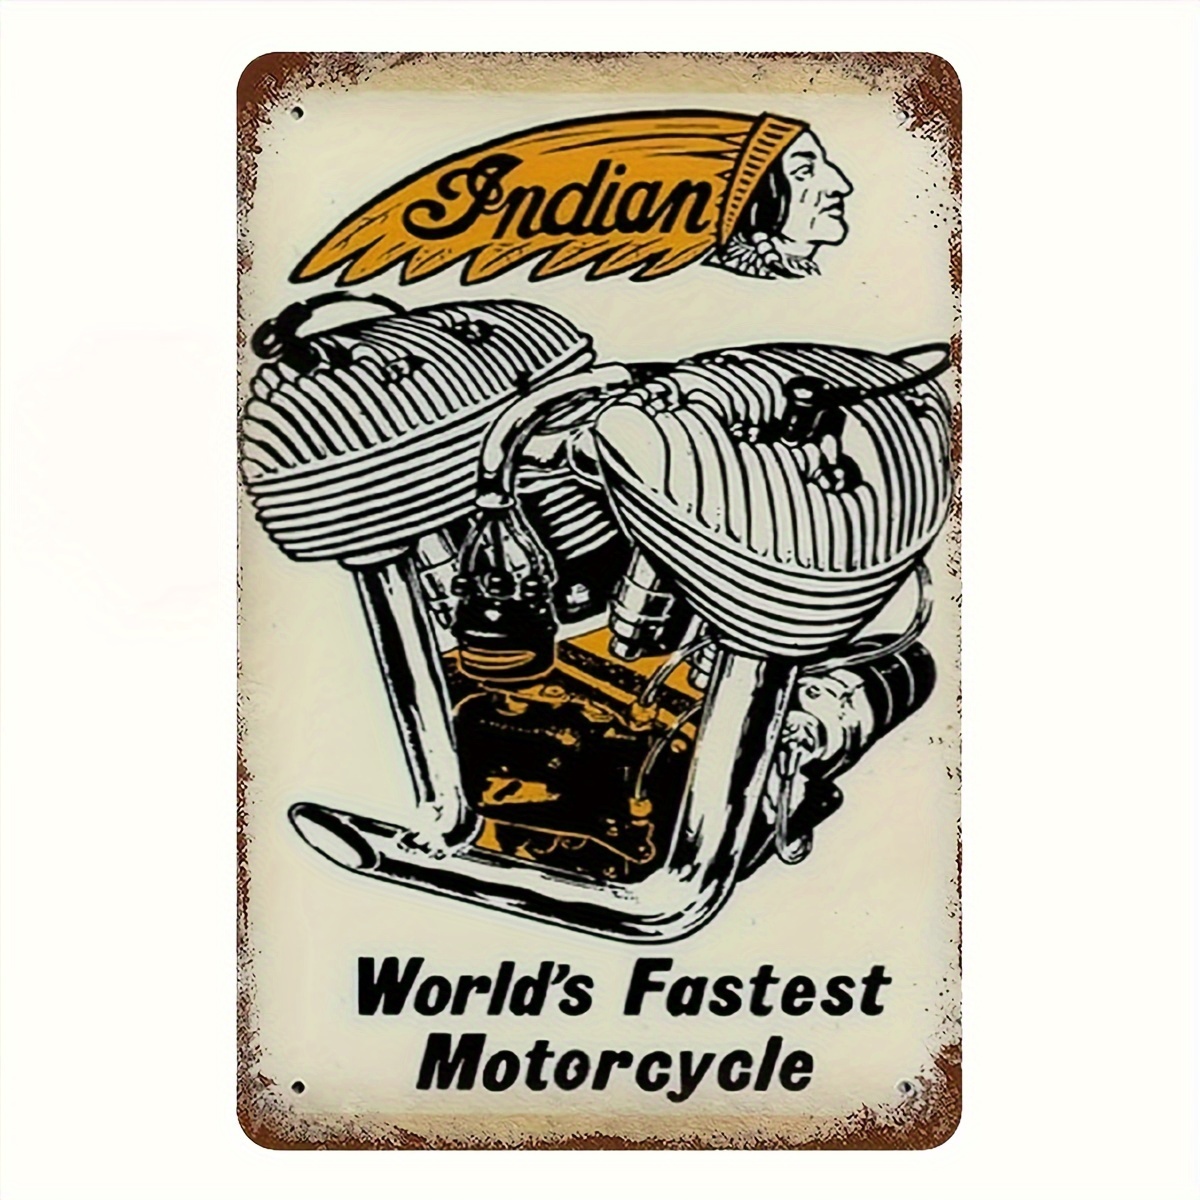 

Vintage Indian Motorcycle Metal Tin Sign 12x8 Inches - Retro Garage Wall Art For Man Cave, Home Bar, Office Decor - Durable Iron Construction